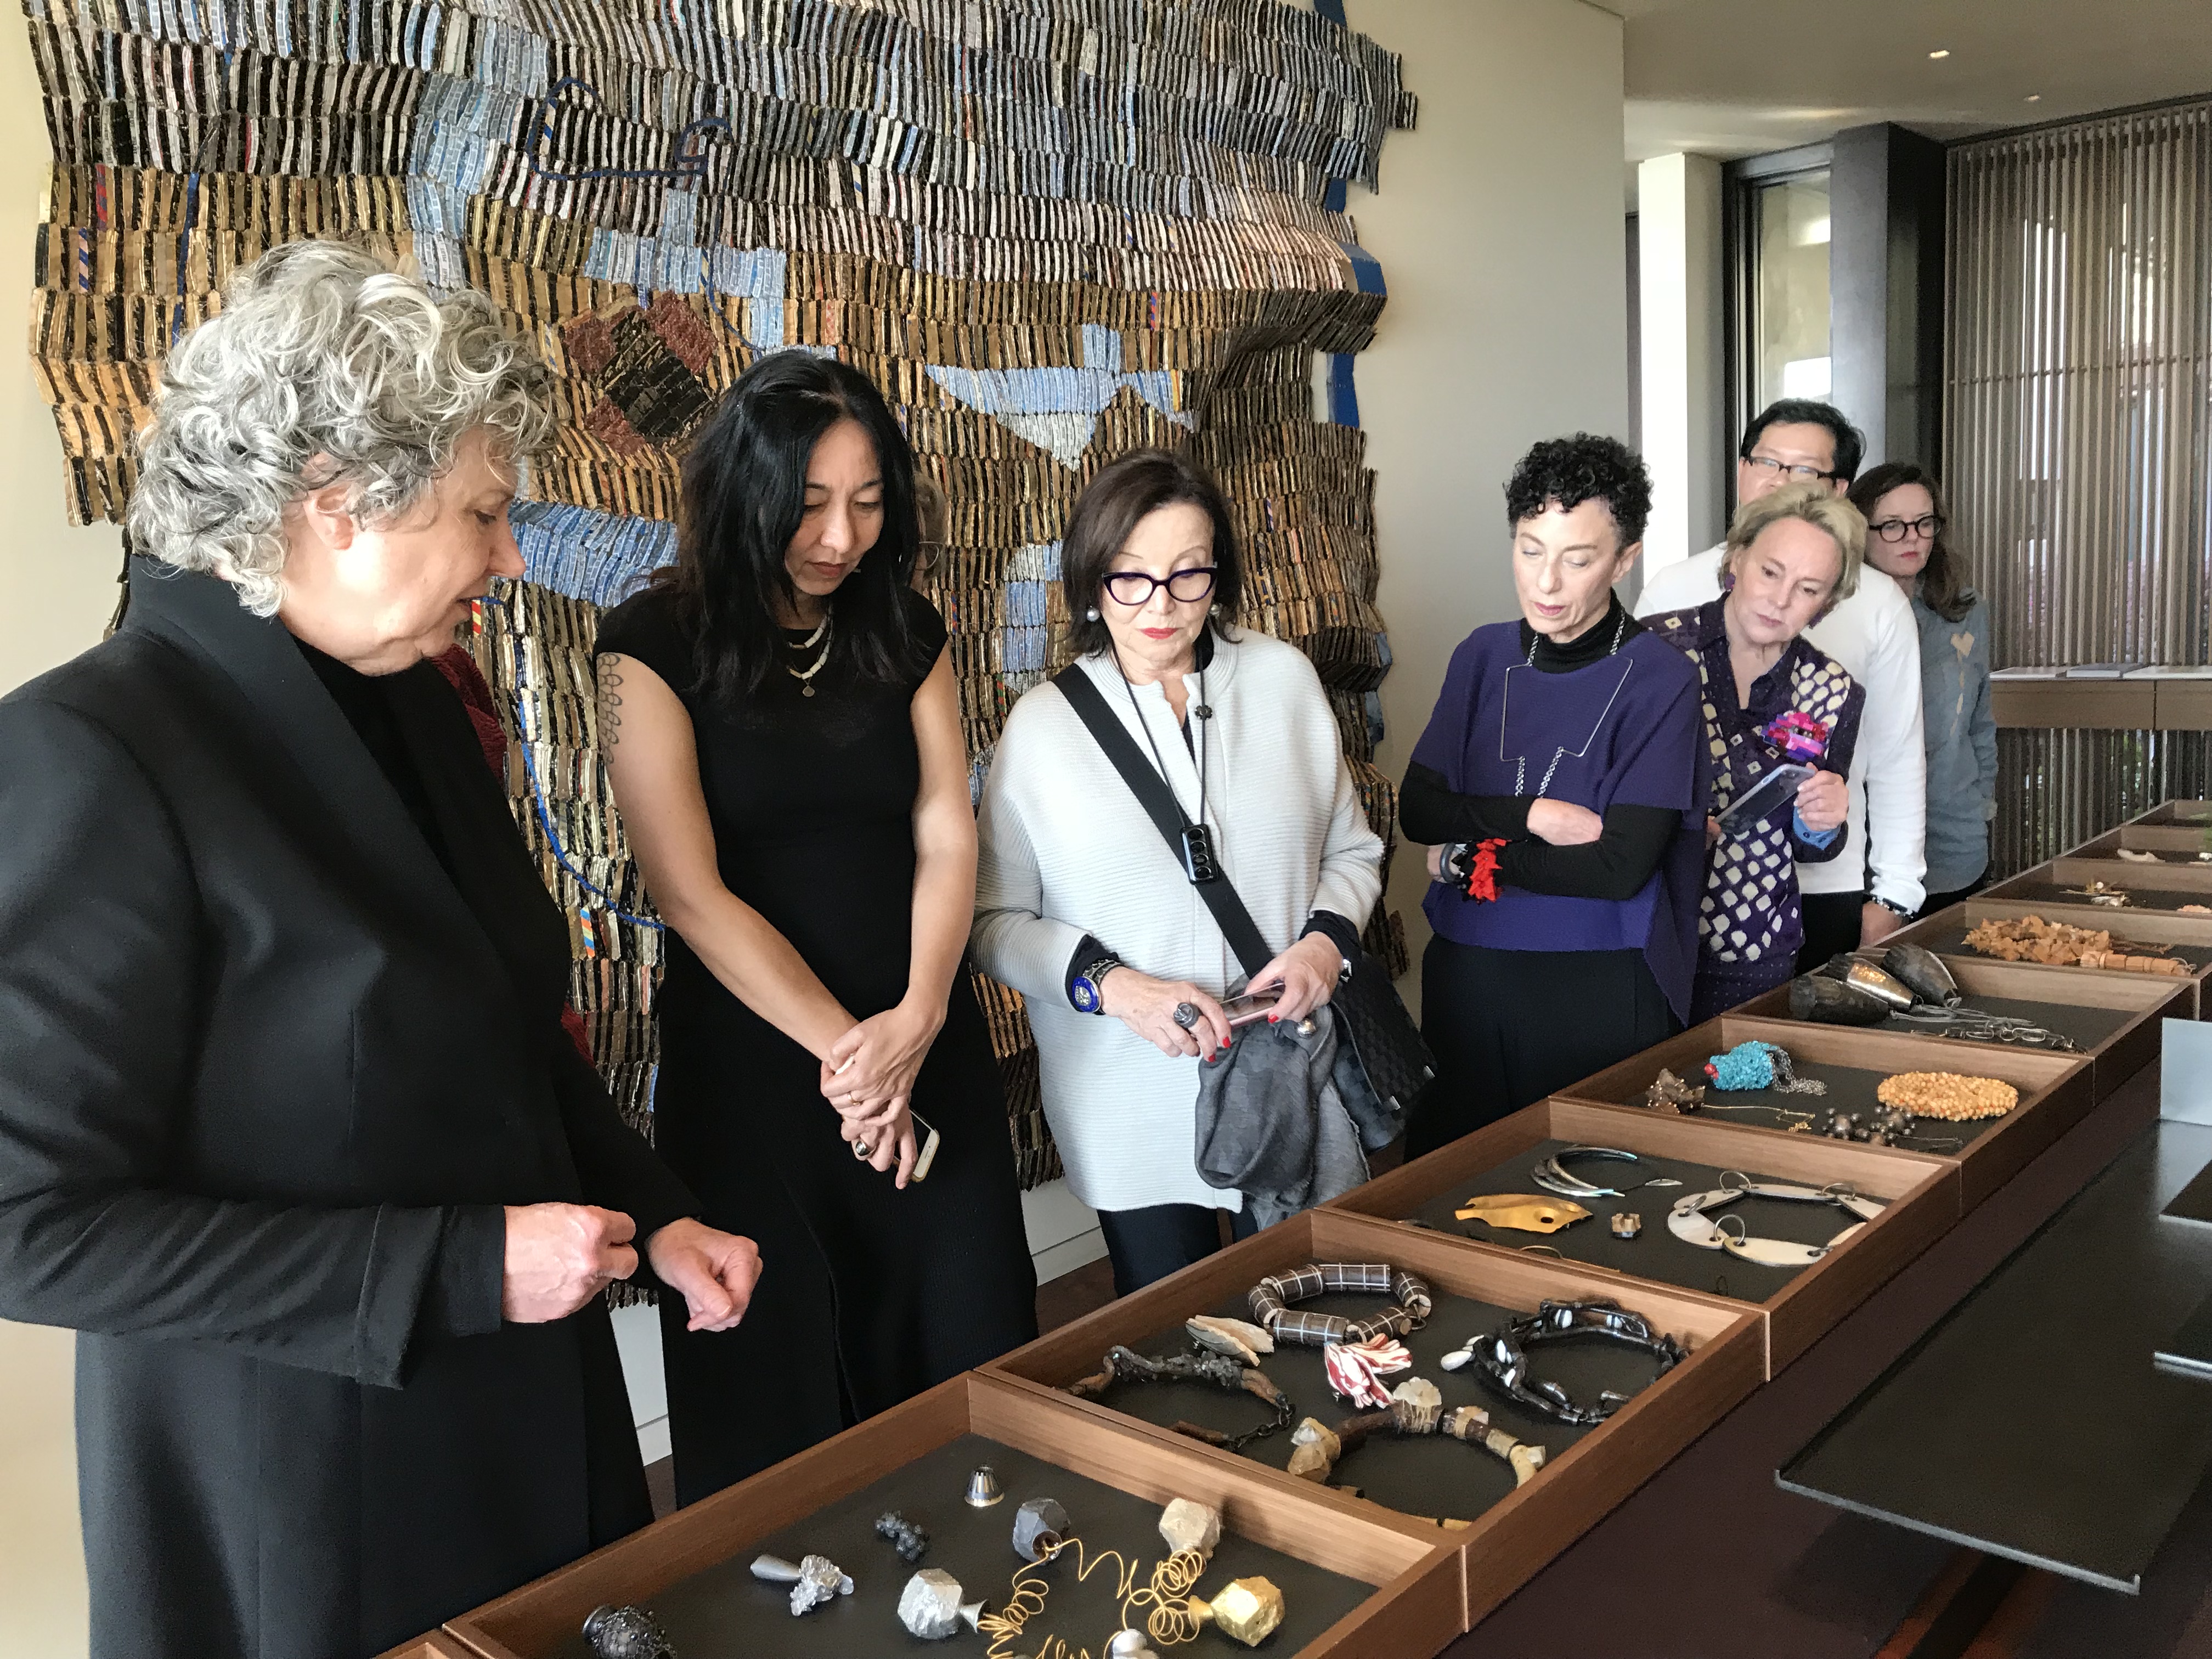 Susan Cummins giving a tour of her home and jewelry collection, photo: Raïssa Bump